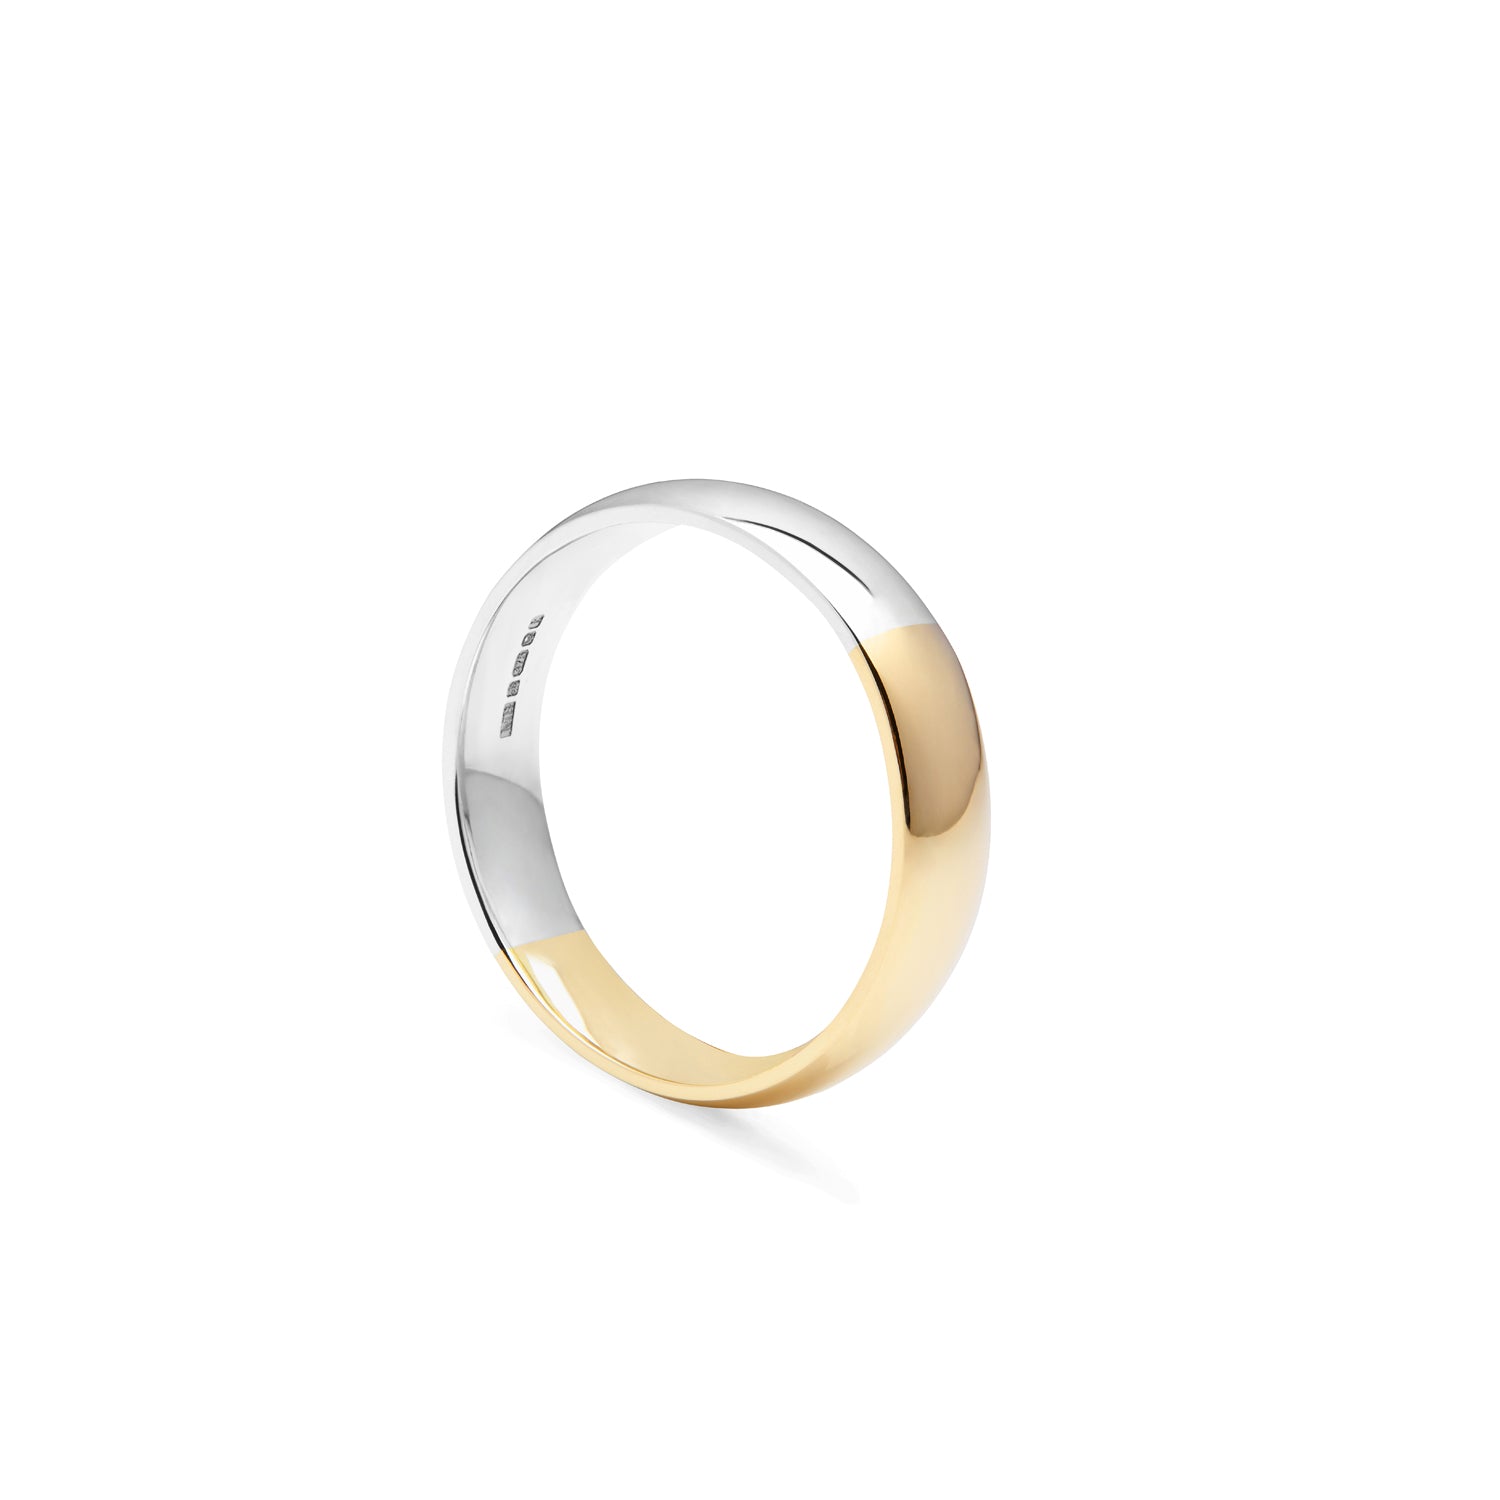 Two-tone Court 5mm Comfort Fit Band - 9k Yellow & White Gold - Myia Bonner Jewellery